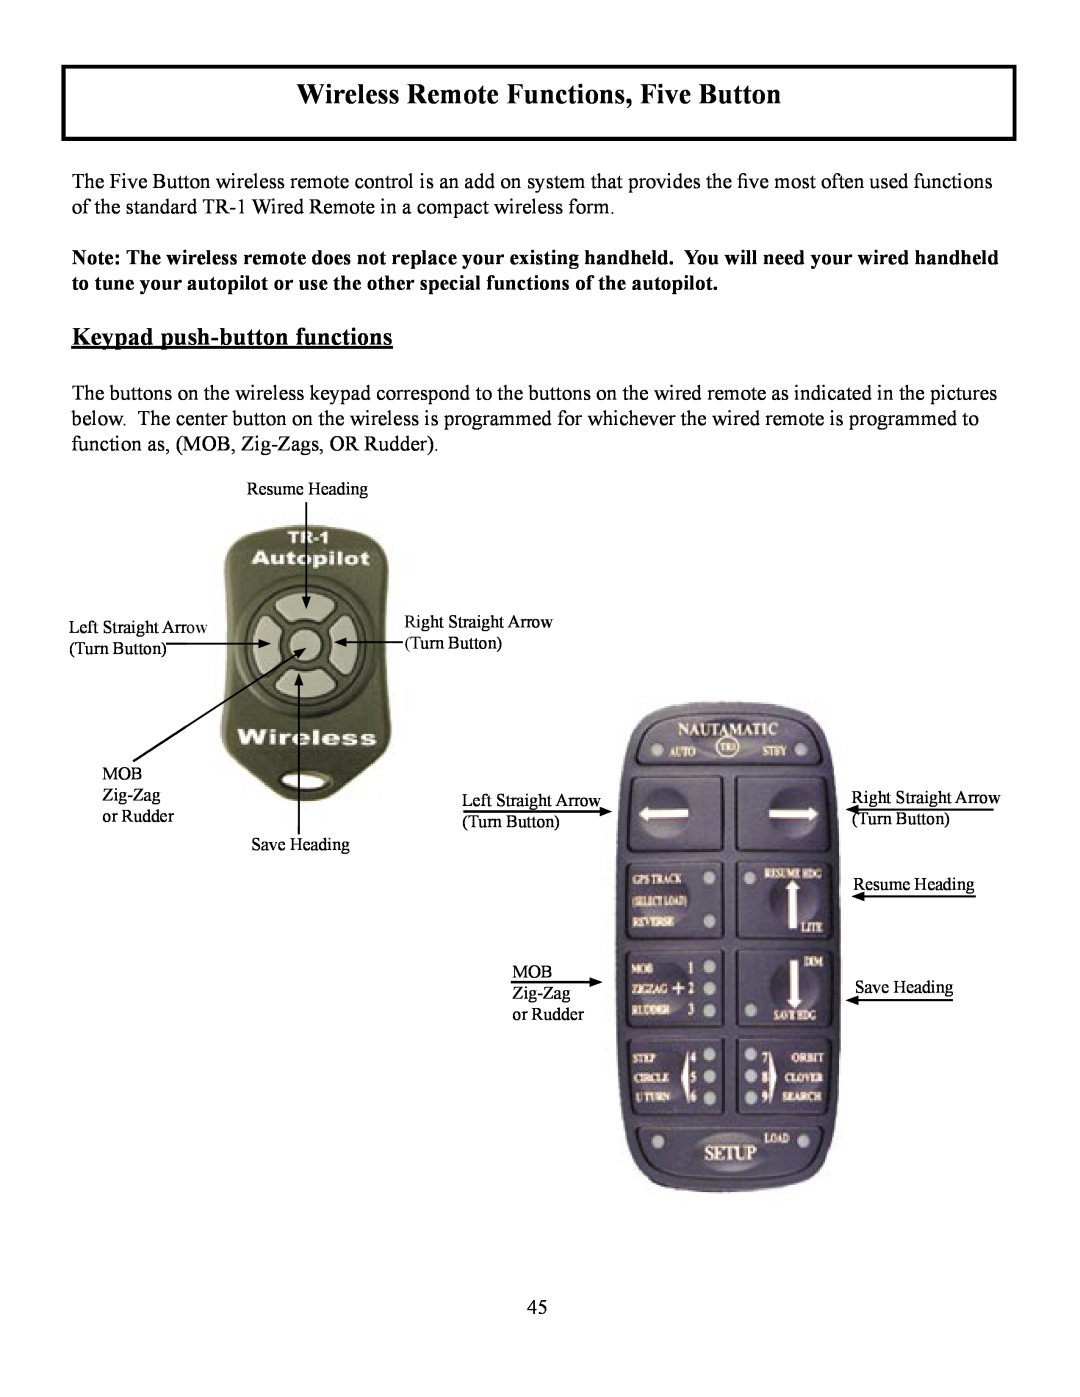 Garmin TR-1 manual Wireless Remote Functions, Five Button, Keypad push-button functions 